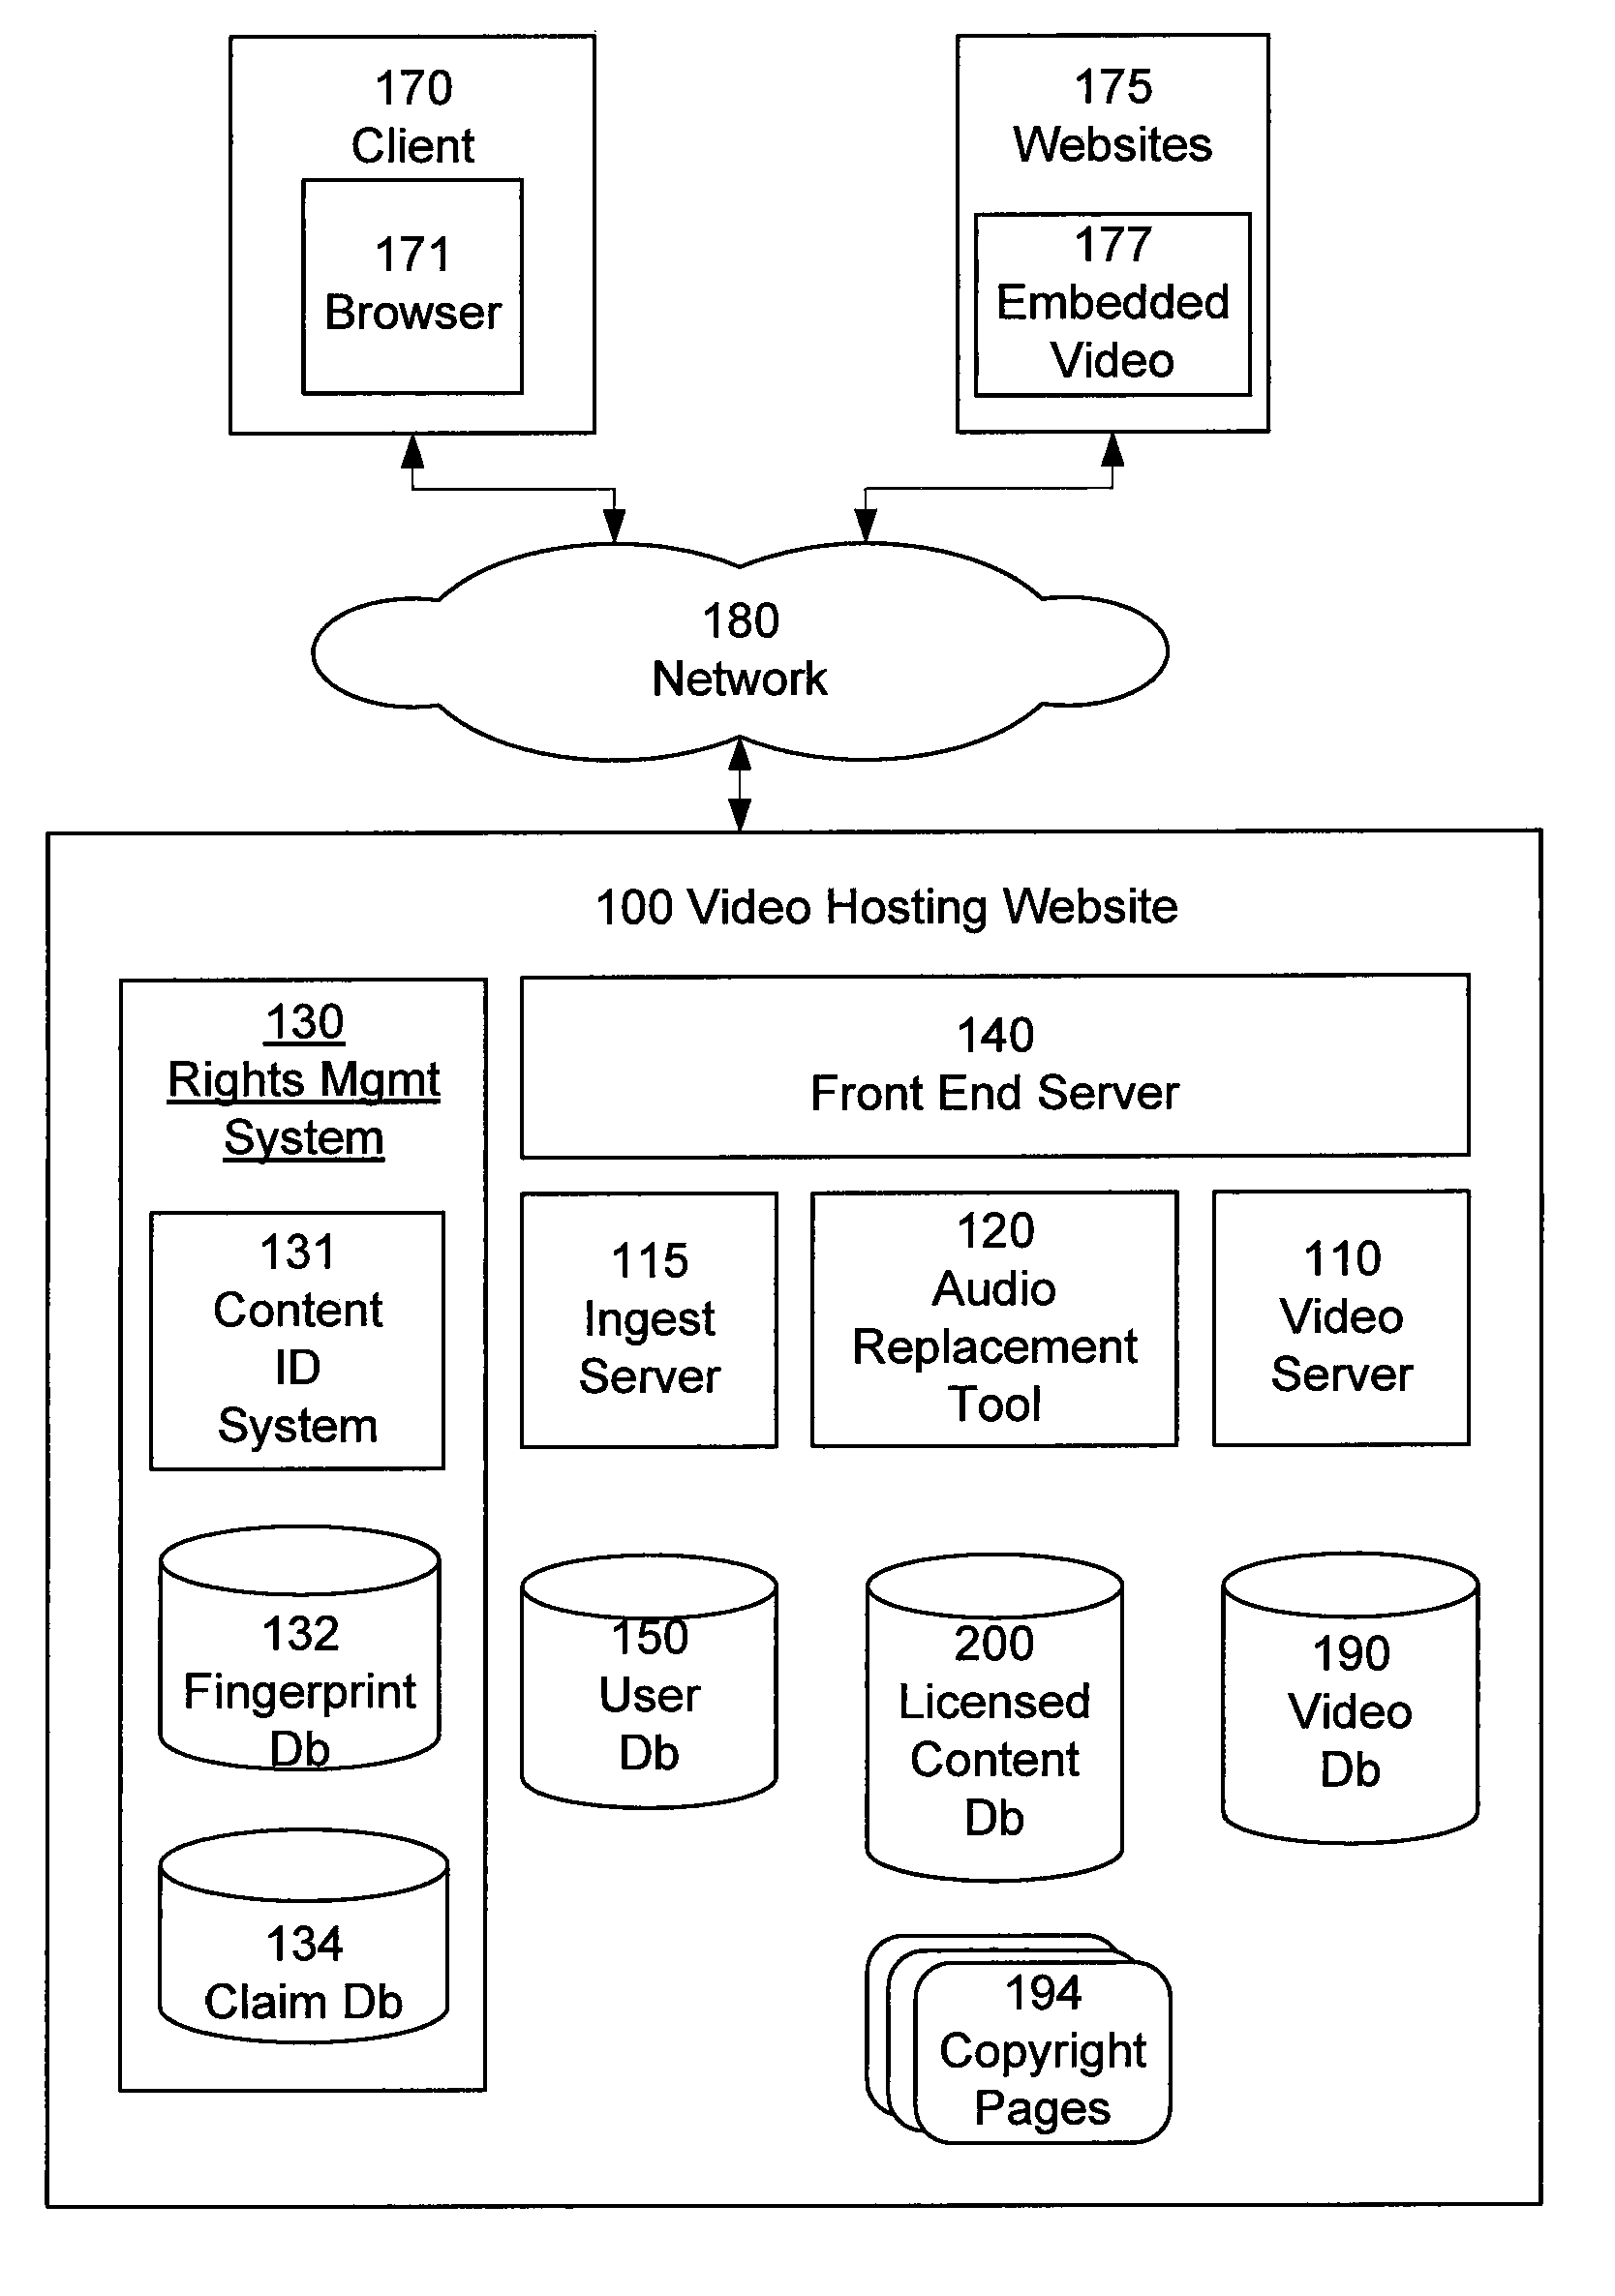 Blocking of Unlicensed Audio Content in Video Files on a Video Hosting Website